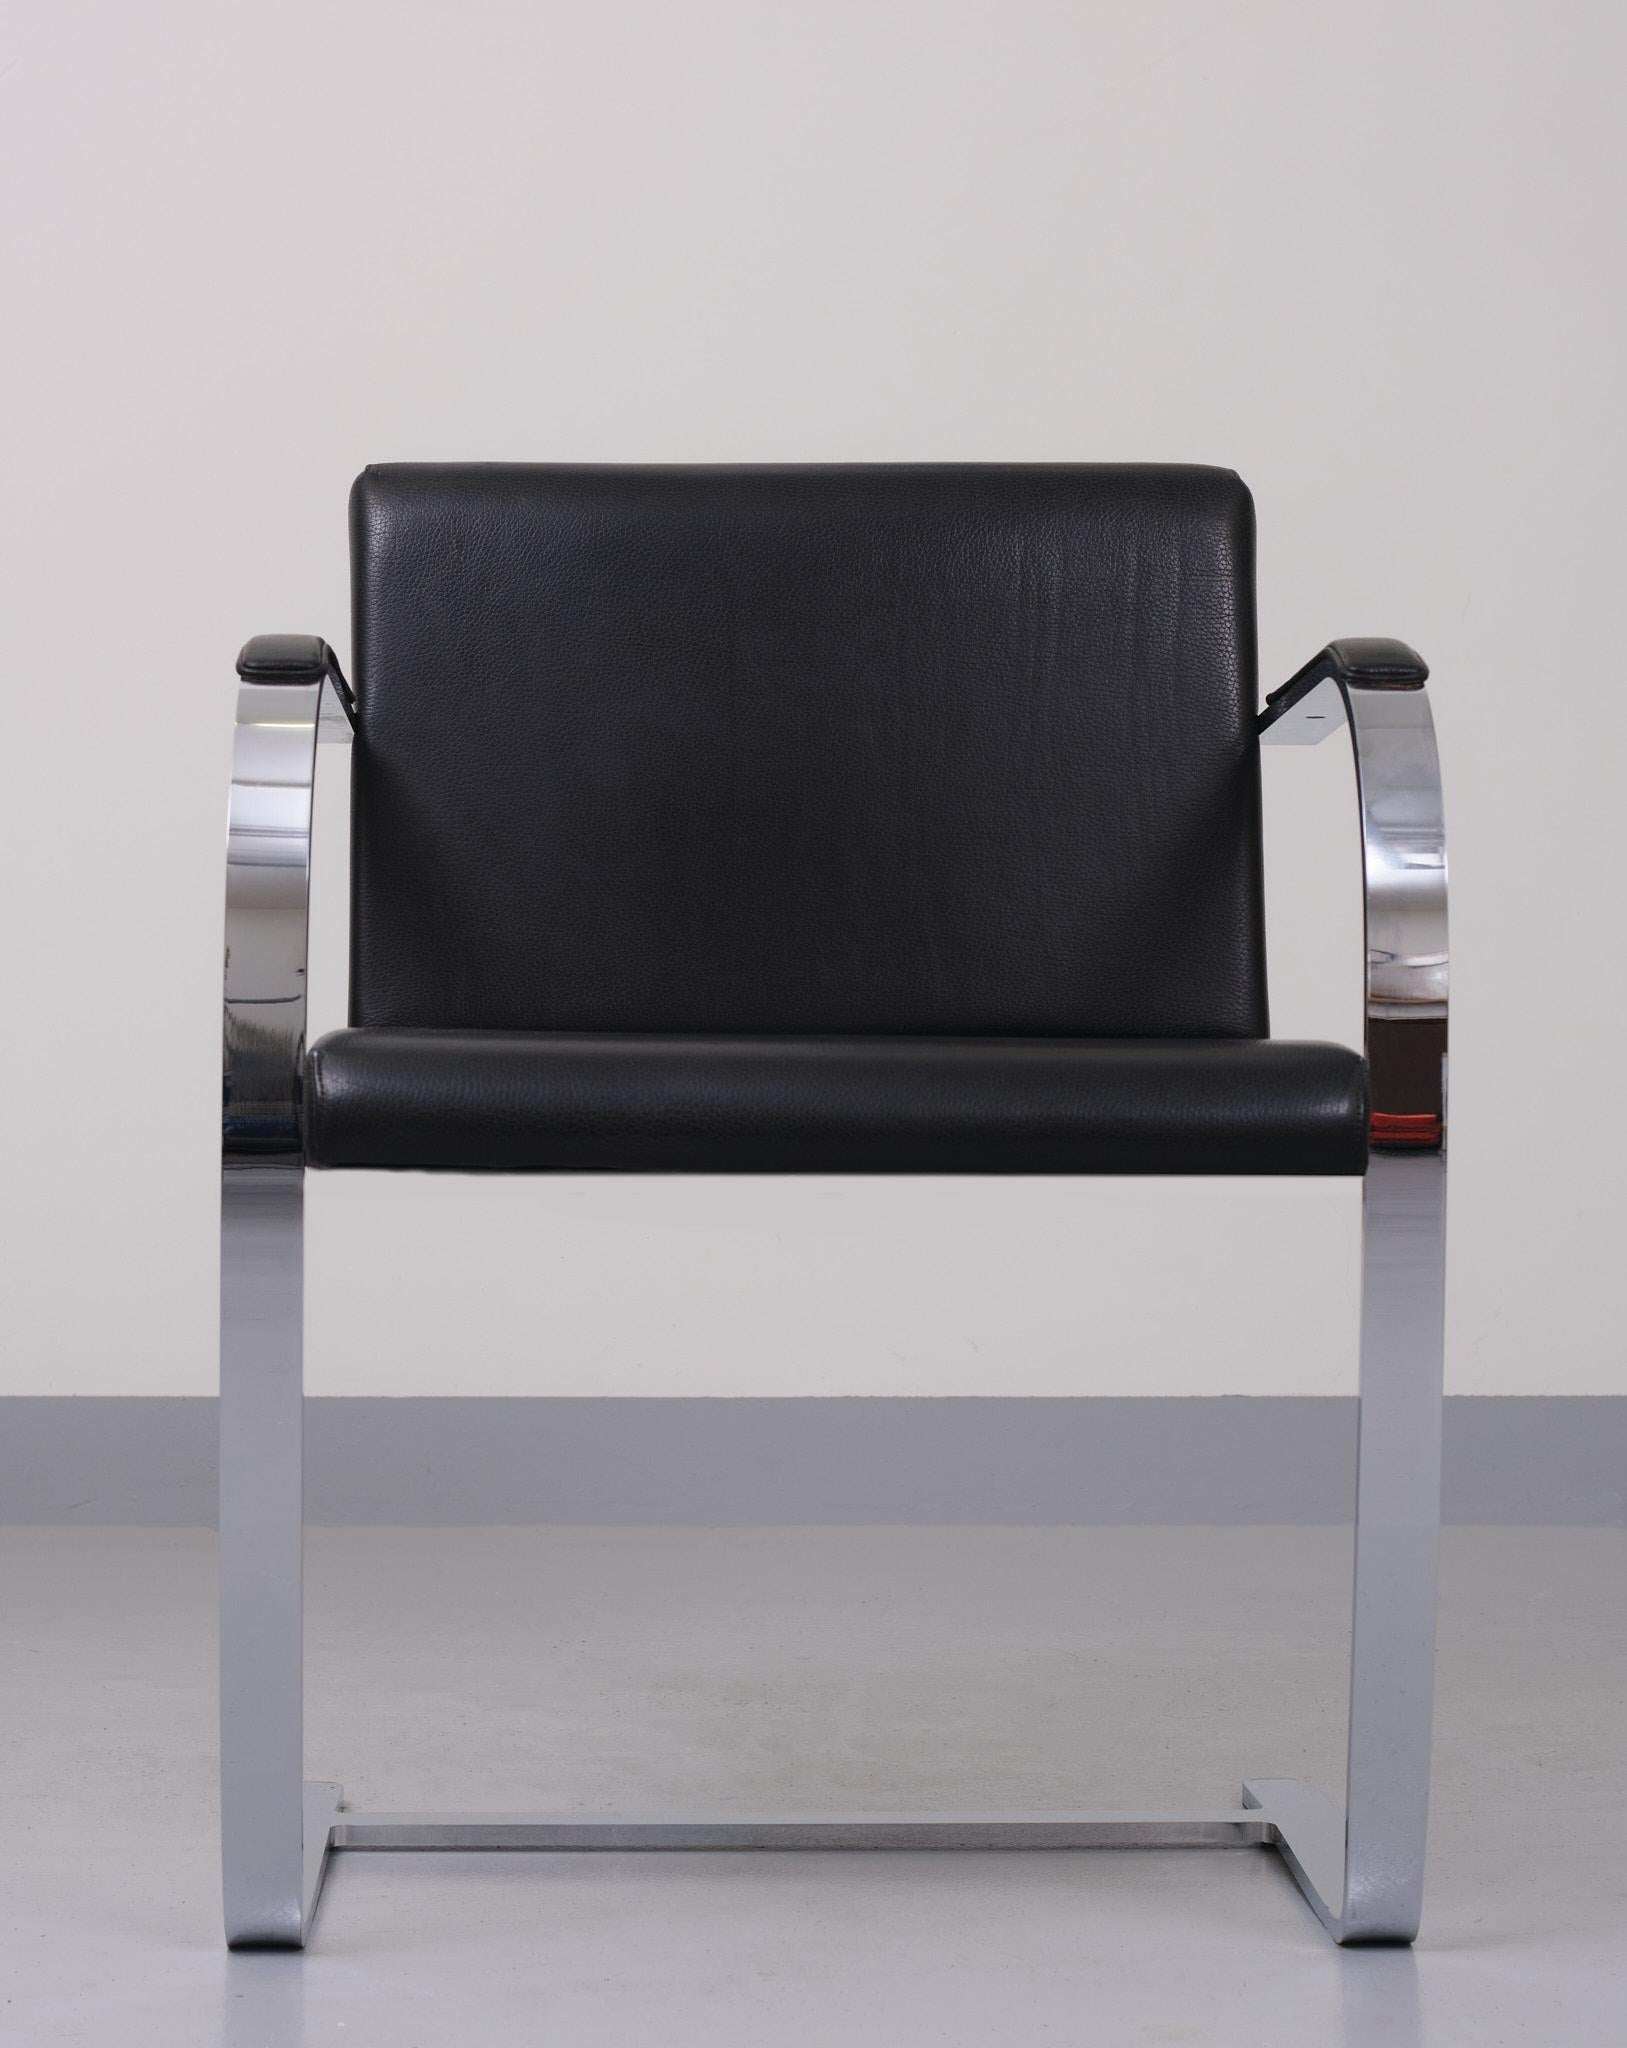 Late 20th Century Black Leather Mies van der Rohe Brno Chair  For Sale